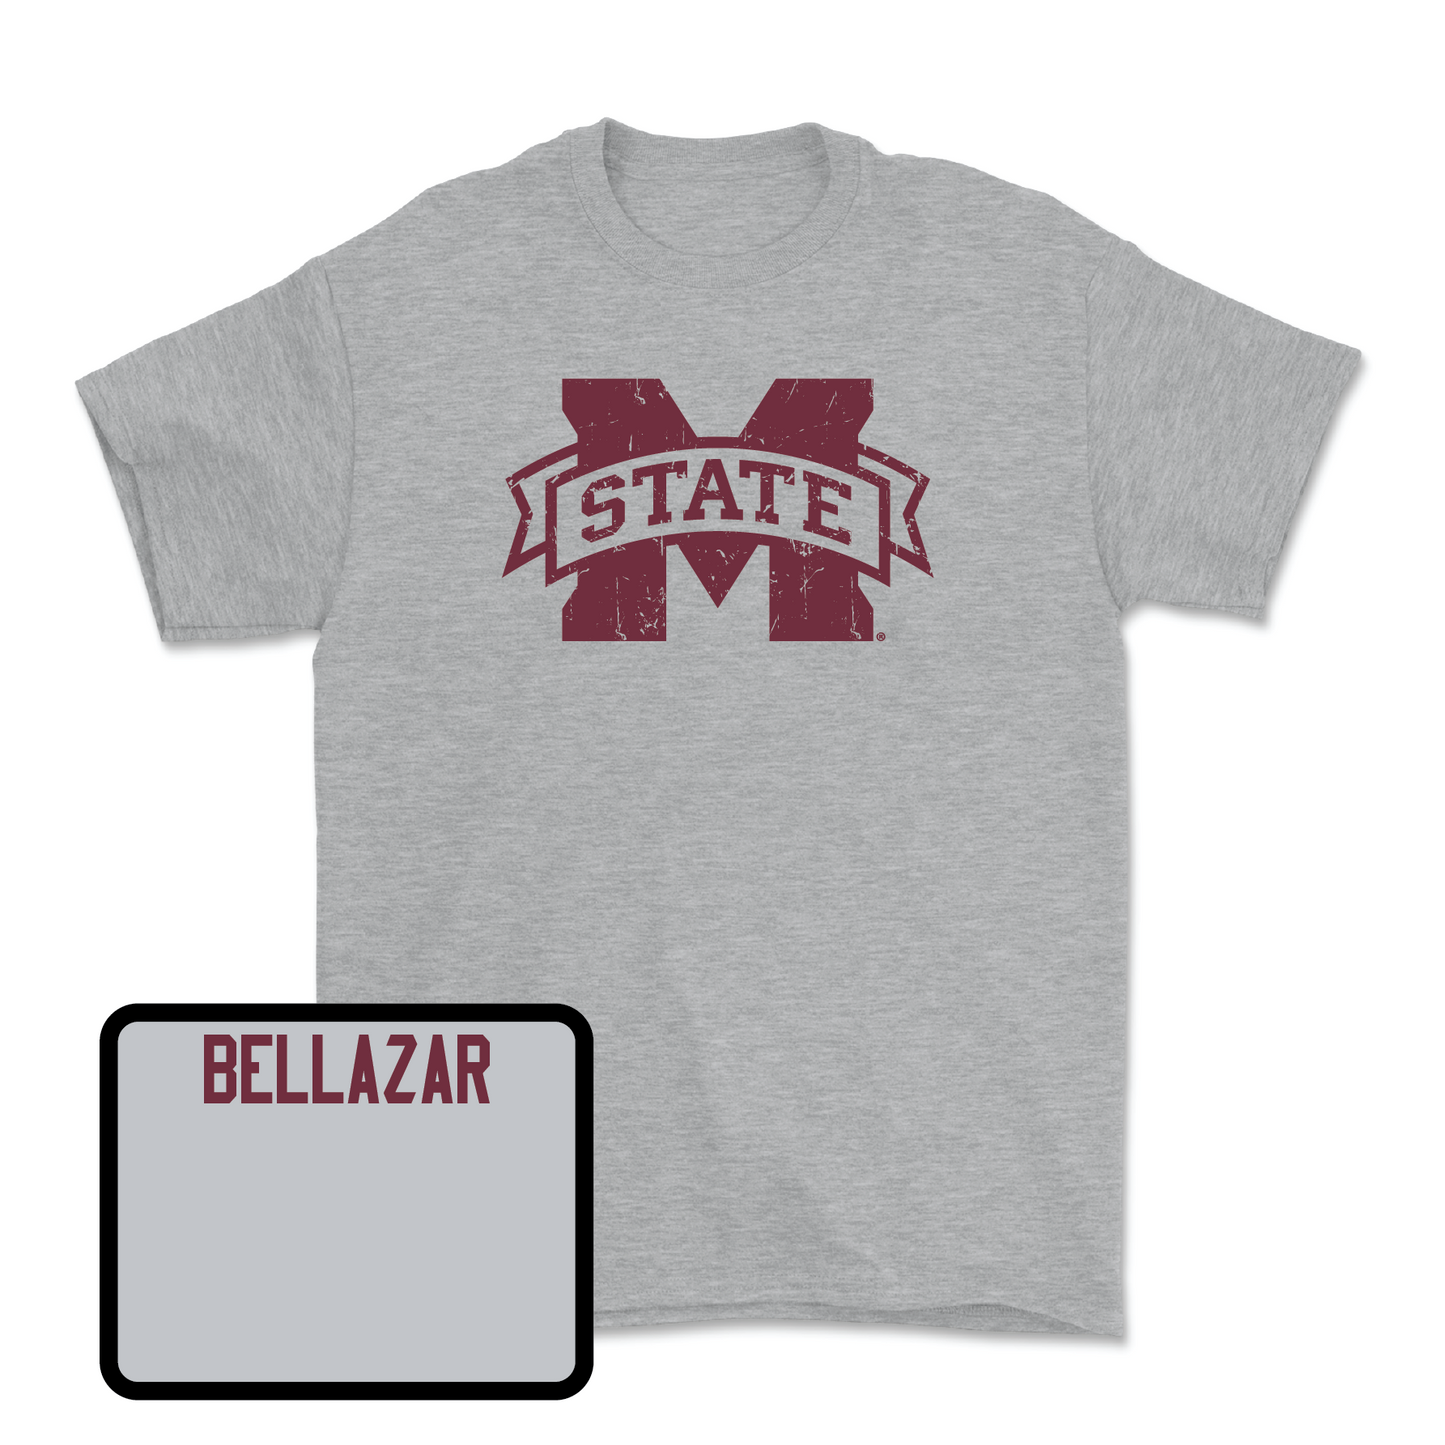 Sport Grey Football Classic Tee X-Large / Jacoby Bellazar | #